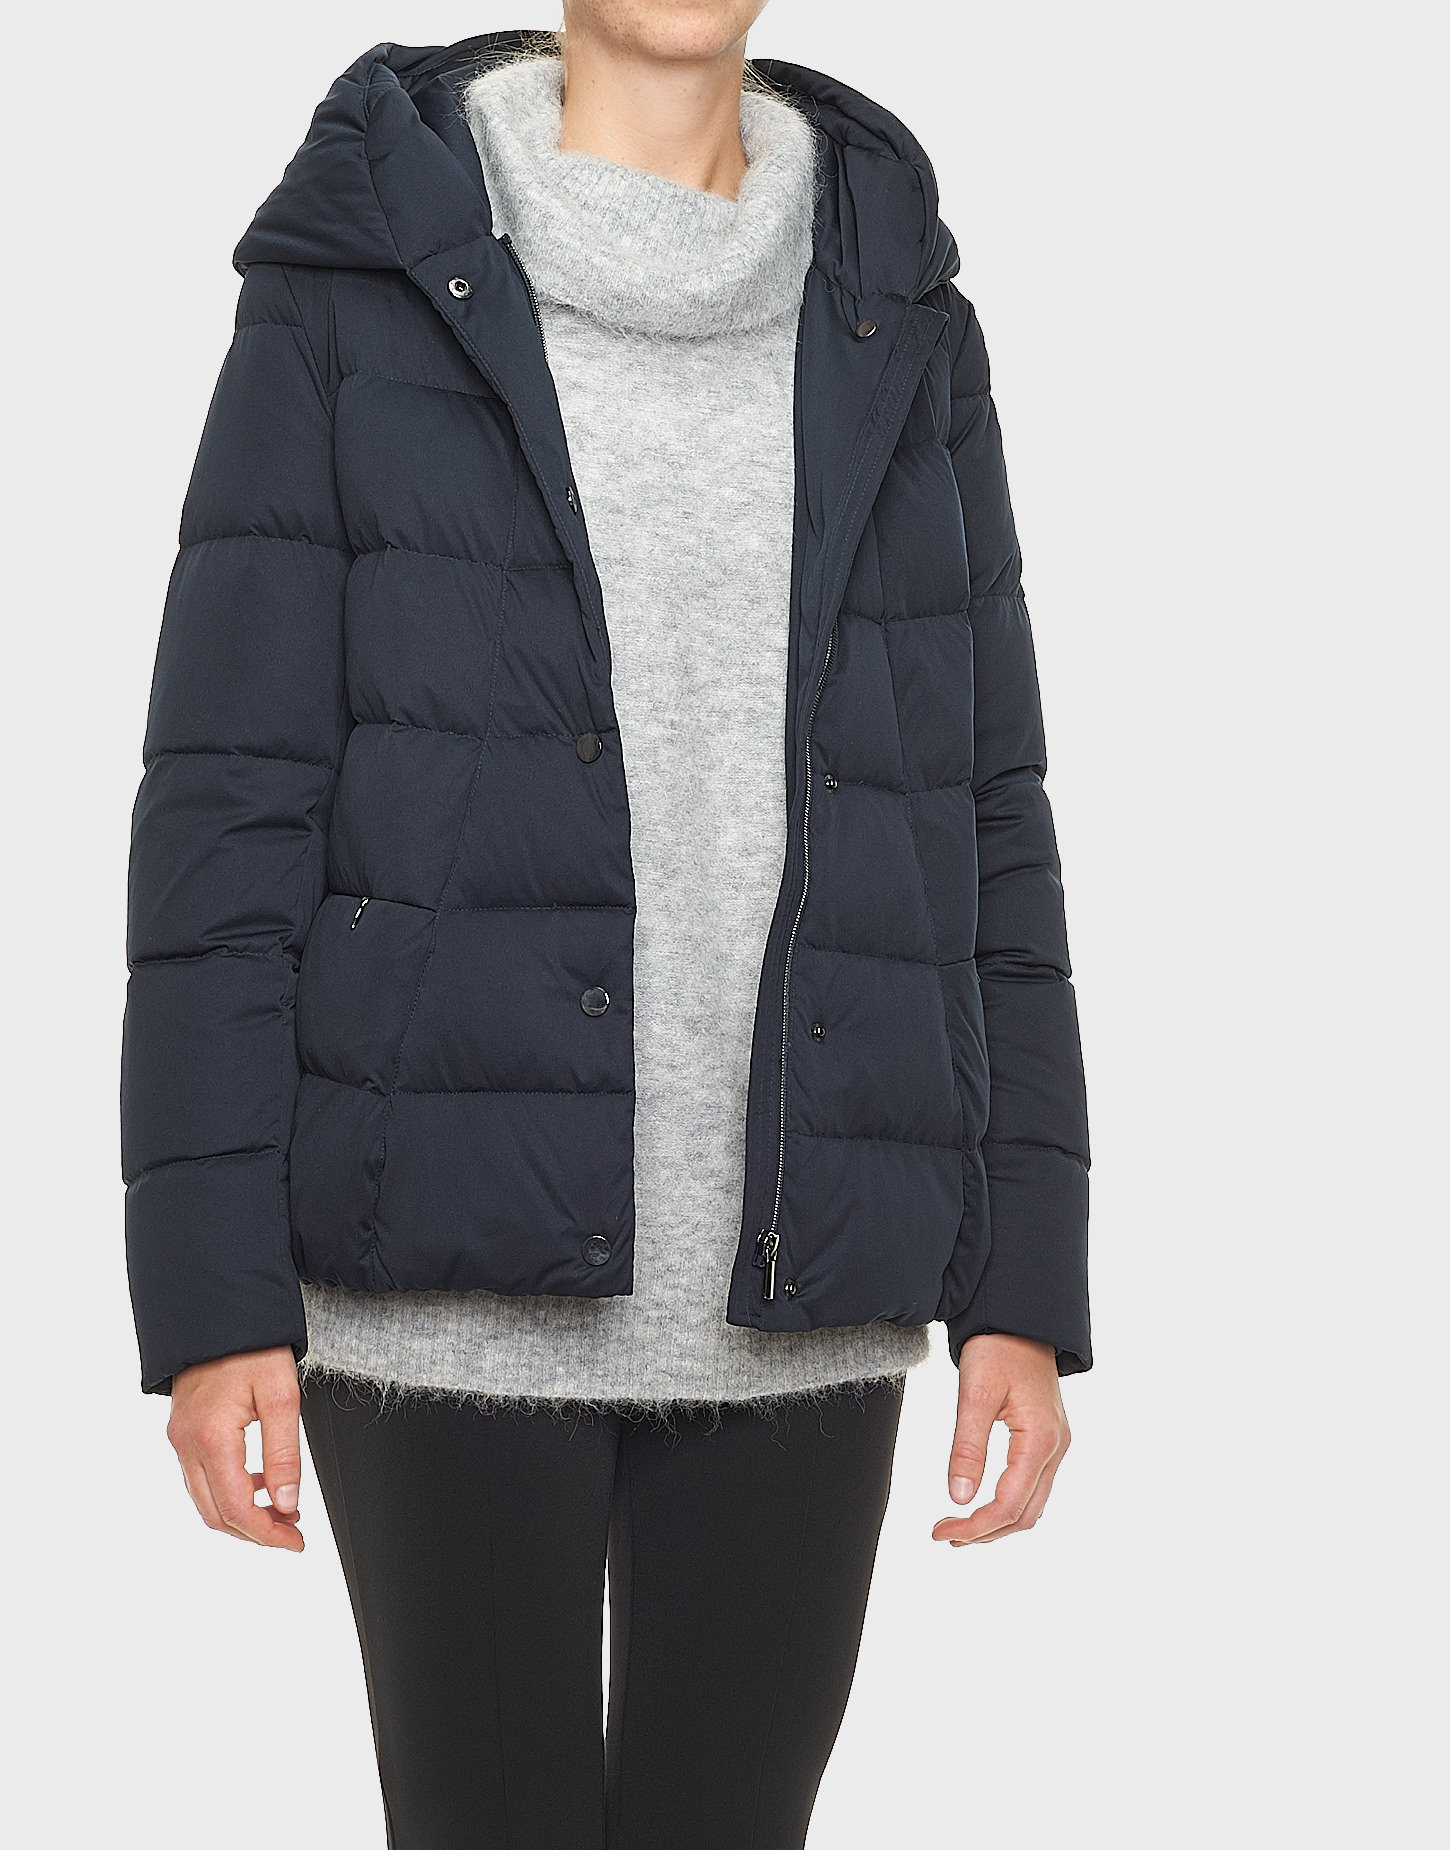 Down jacket Hamza blue by OPUS | shop your favourites online